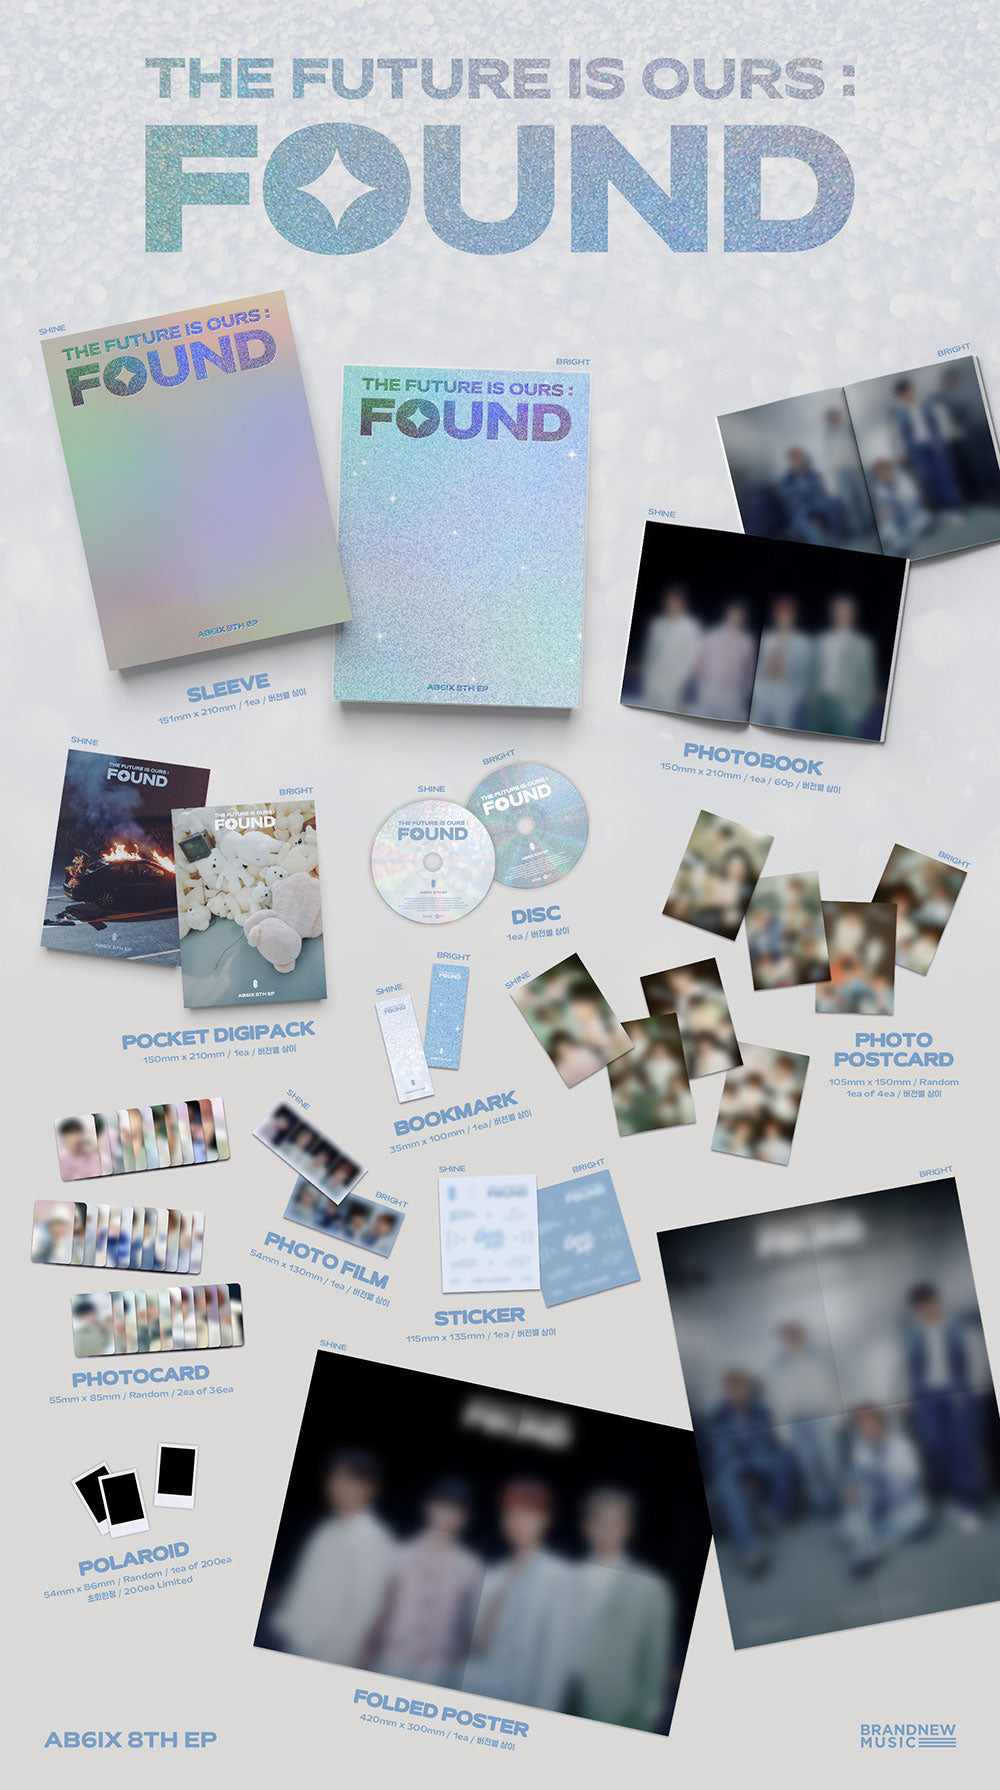 AB6IX - 8TH EP [THE FUTURE IS OURS : FOUND] PHOTOBOOK Ver.